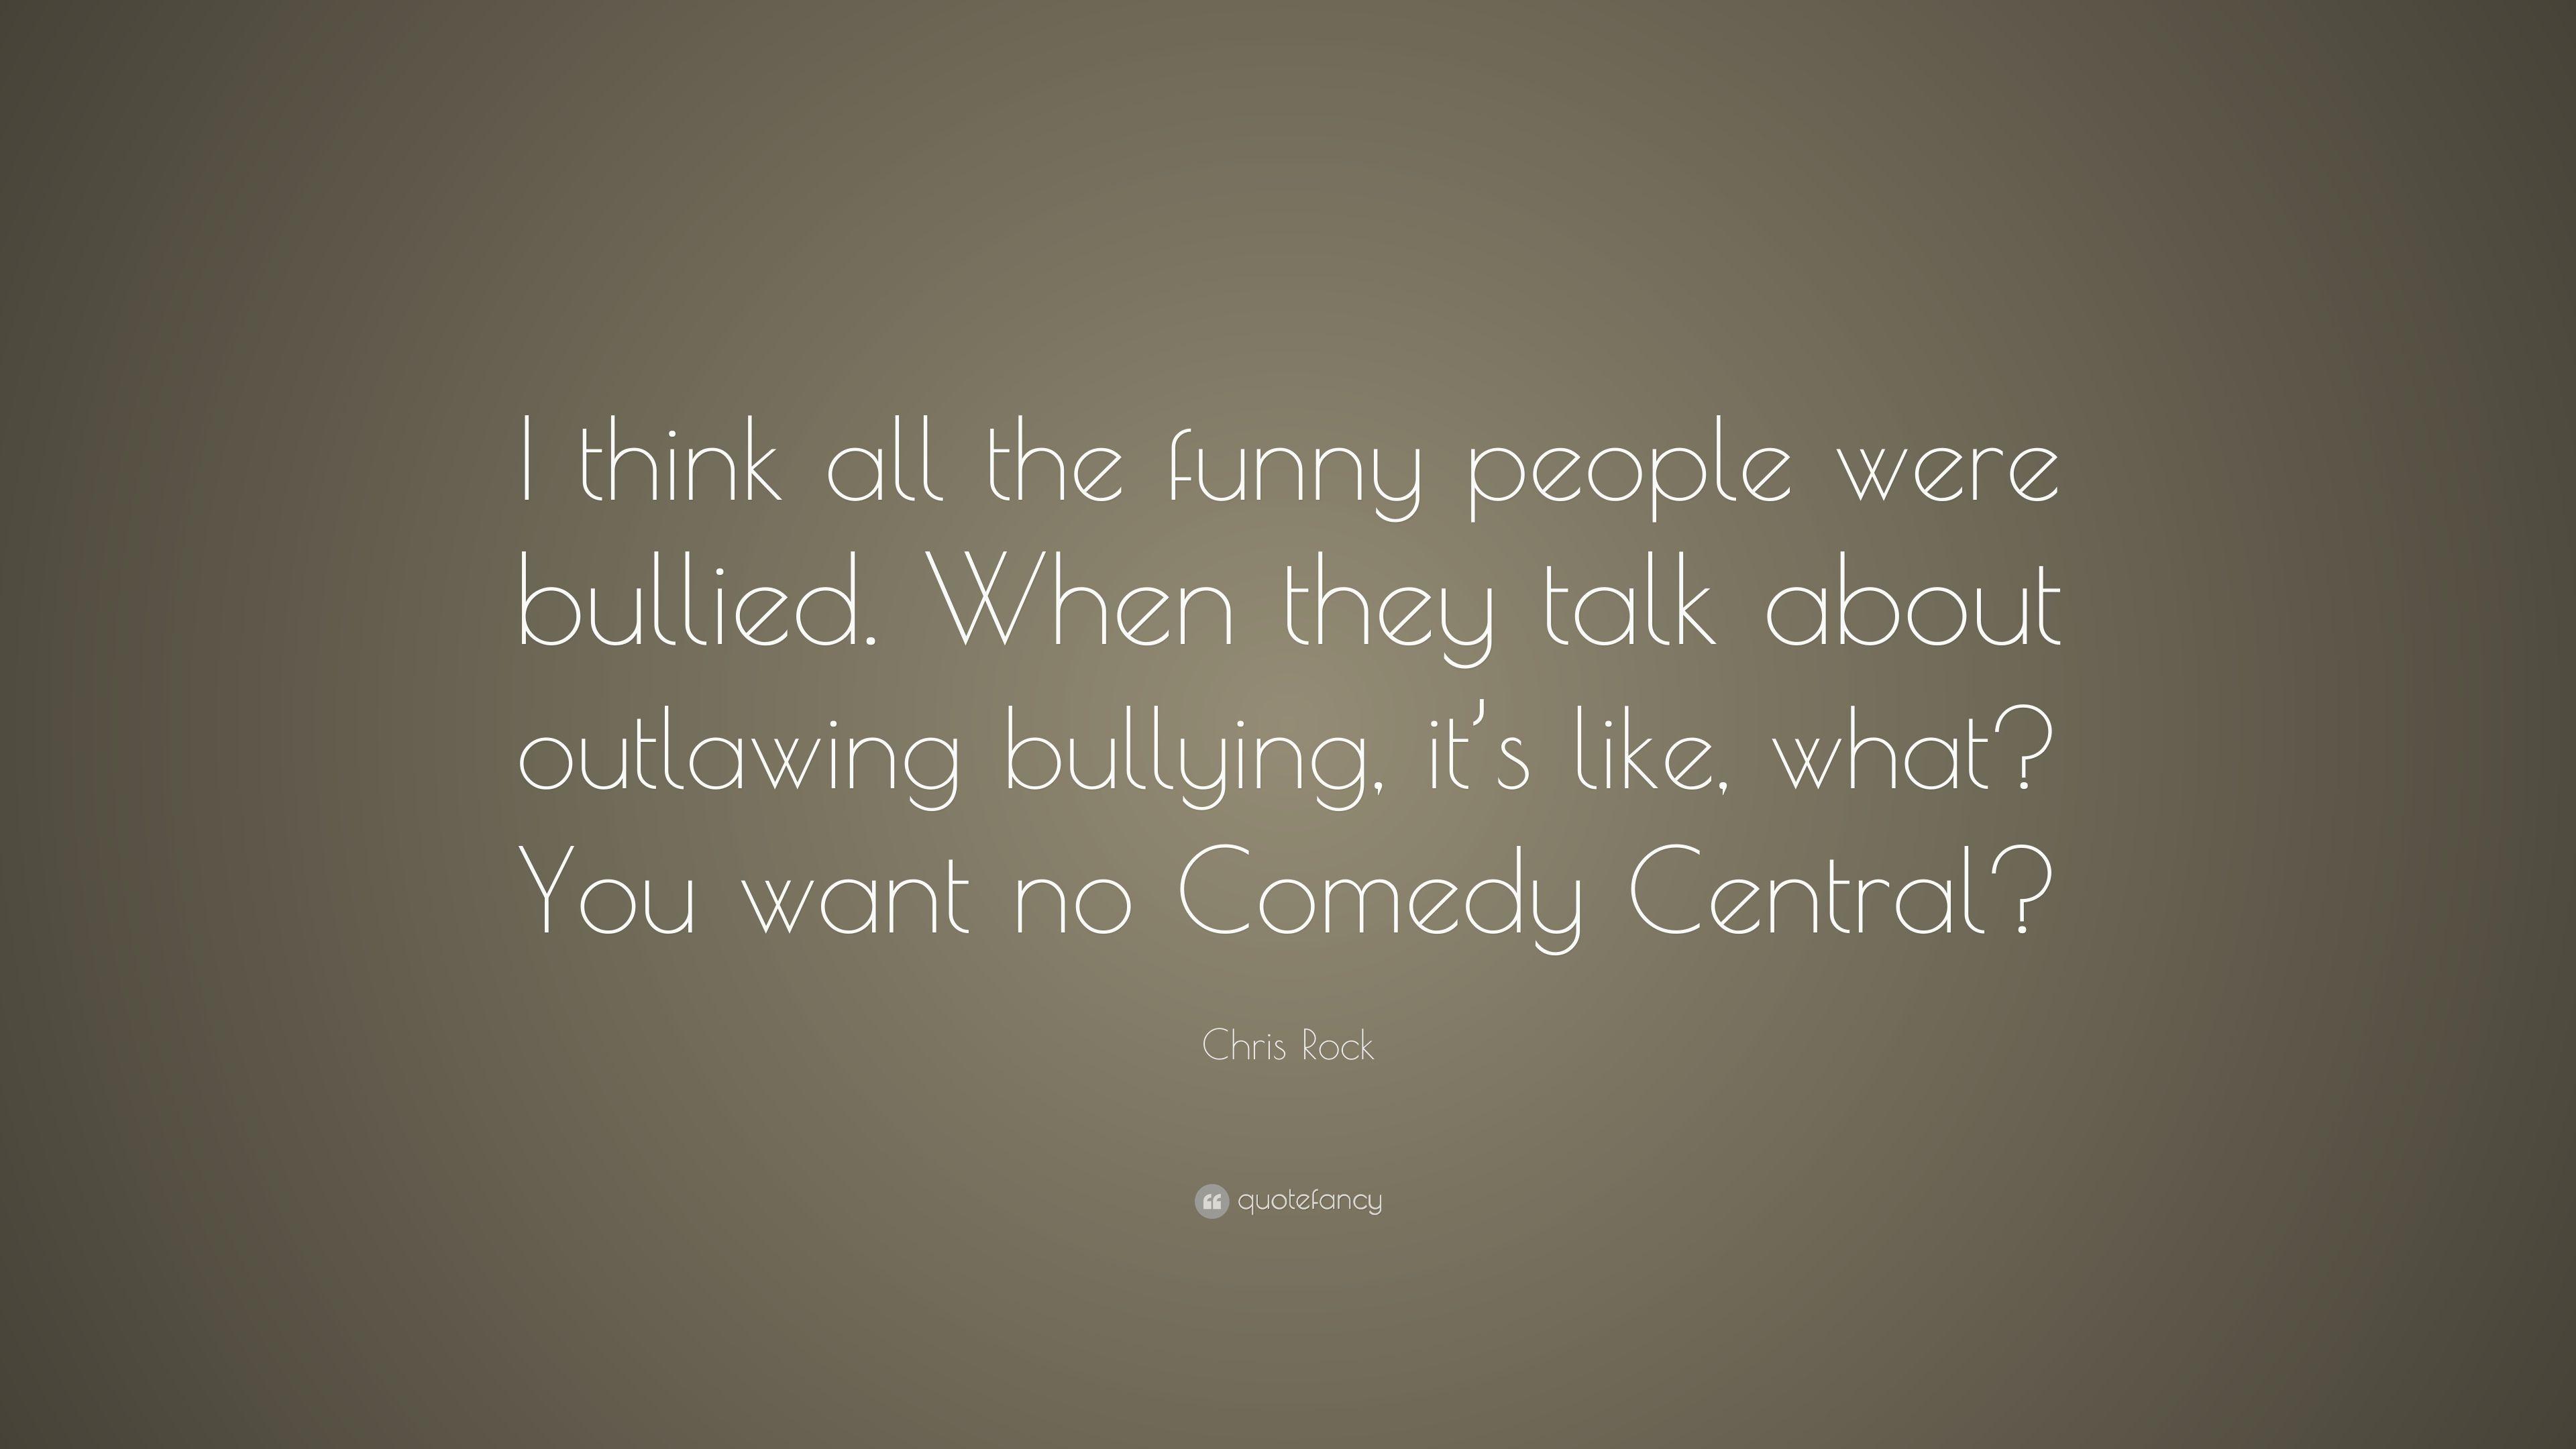 Chris Rock Quote: "I think all the funny people were bullied. 